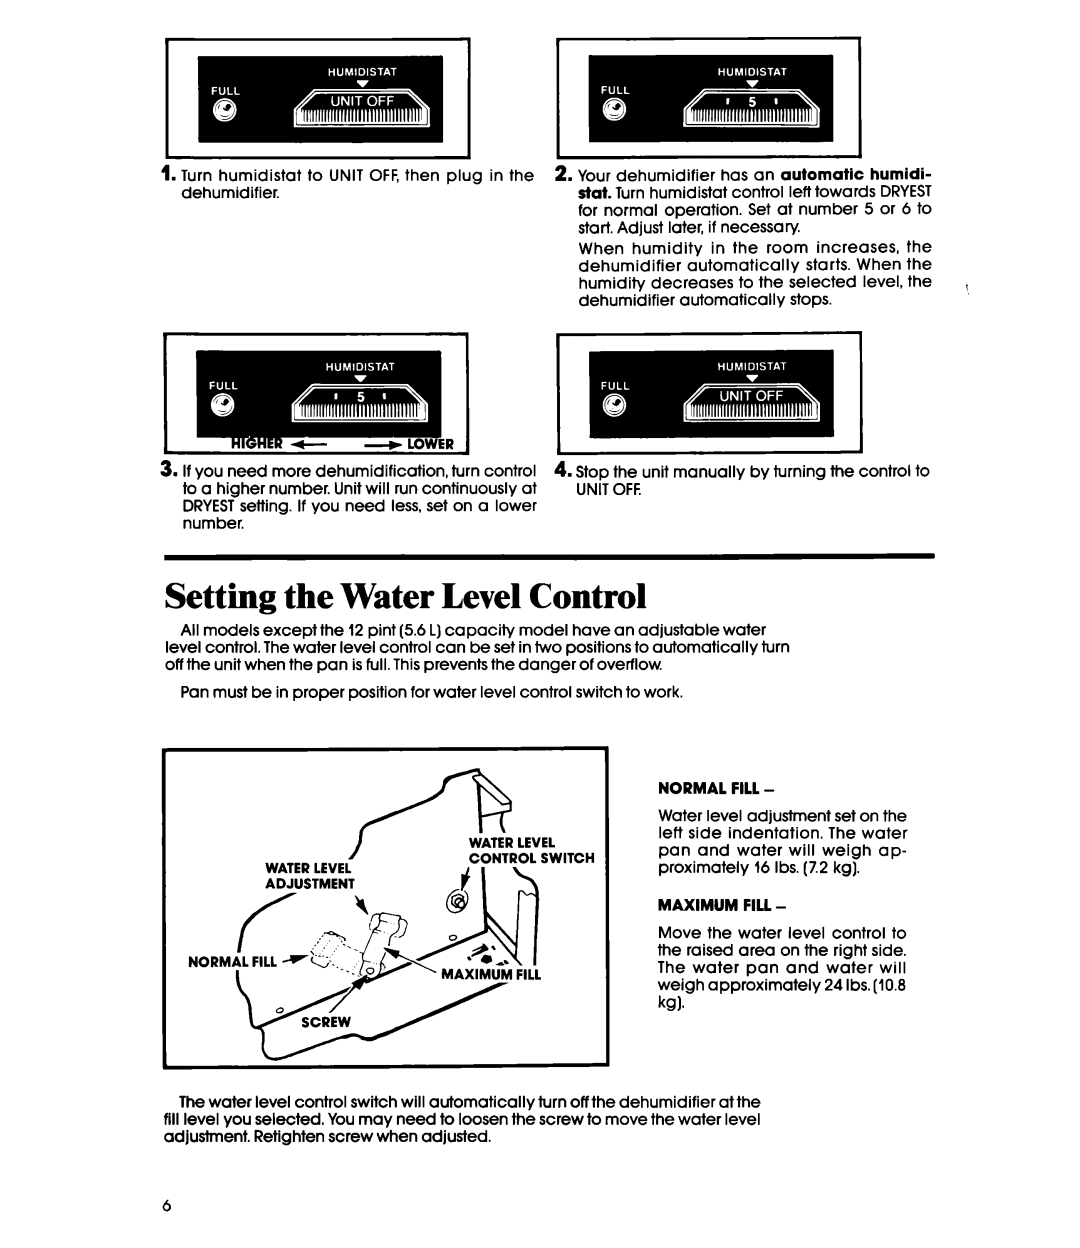 Whirlpool AD0402XM0 manual Setting the Water Level Control 